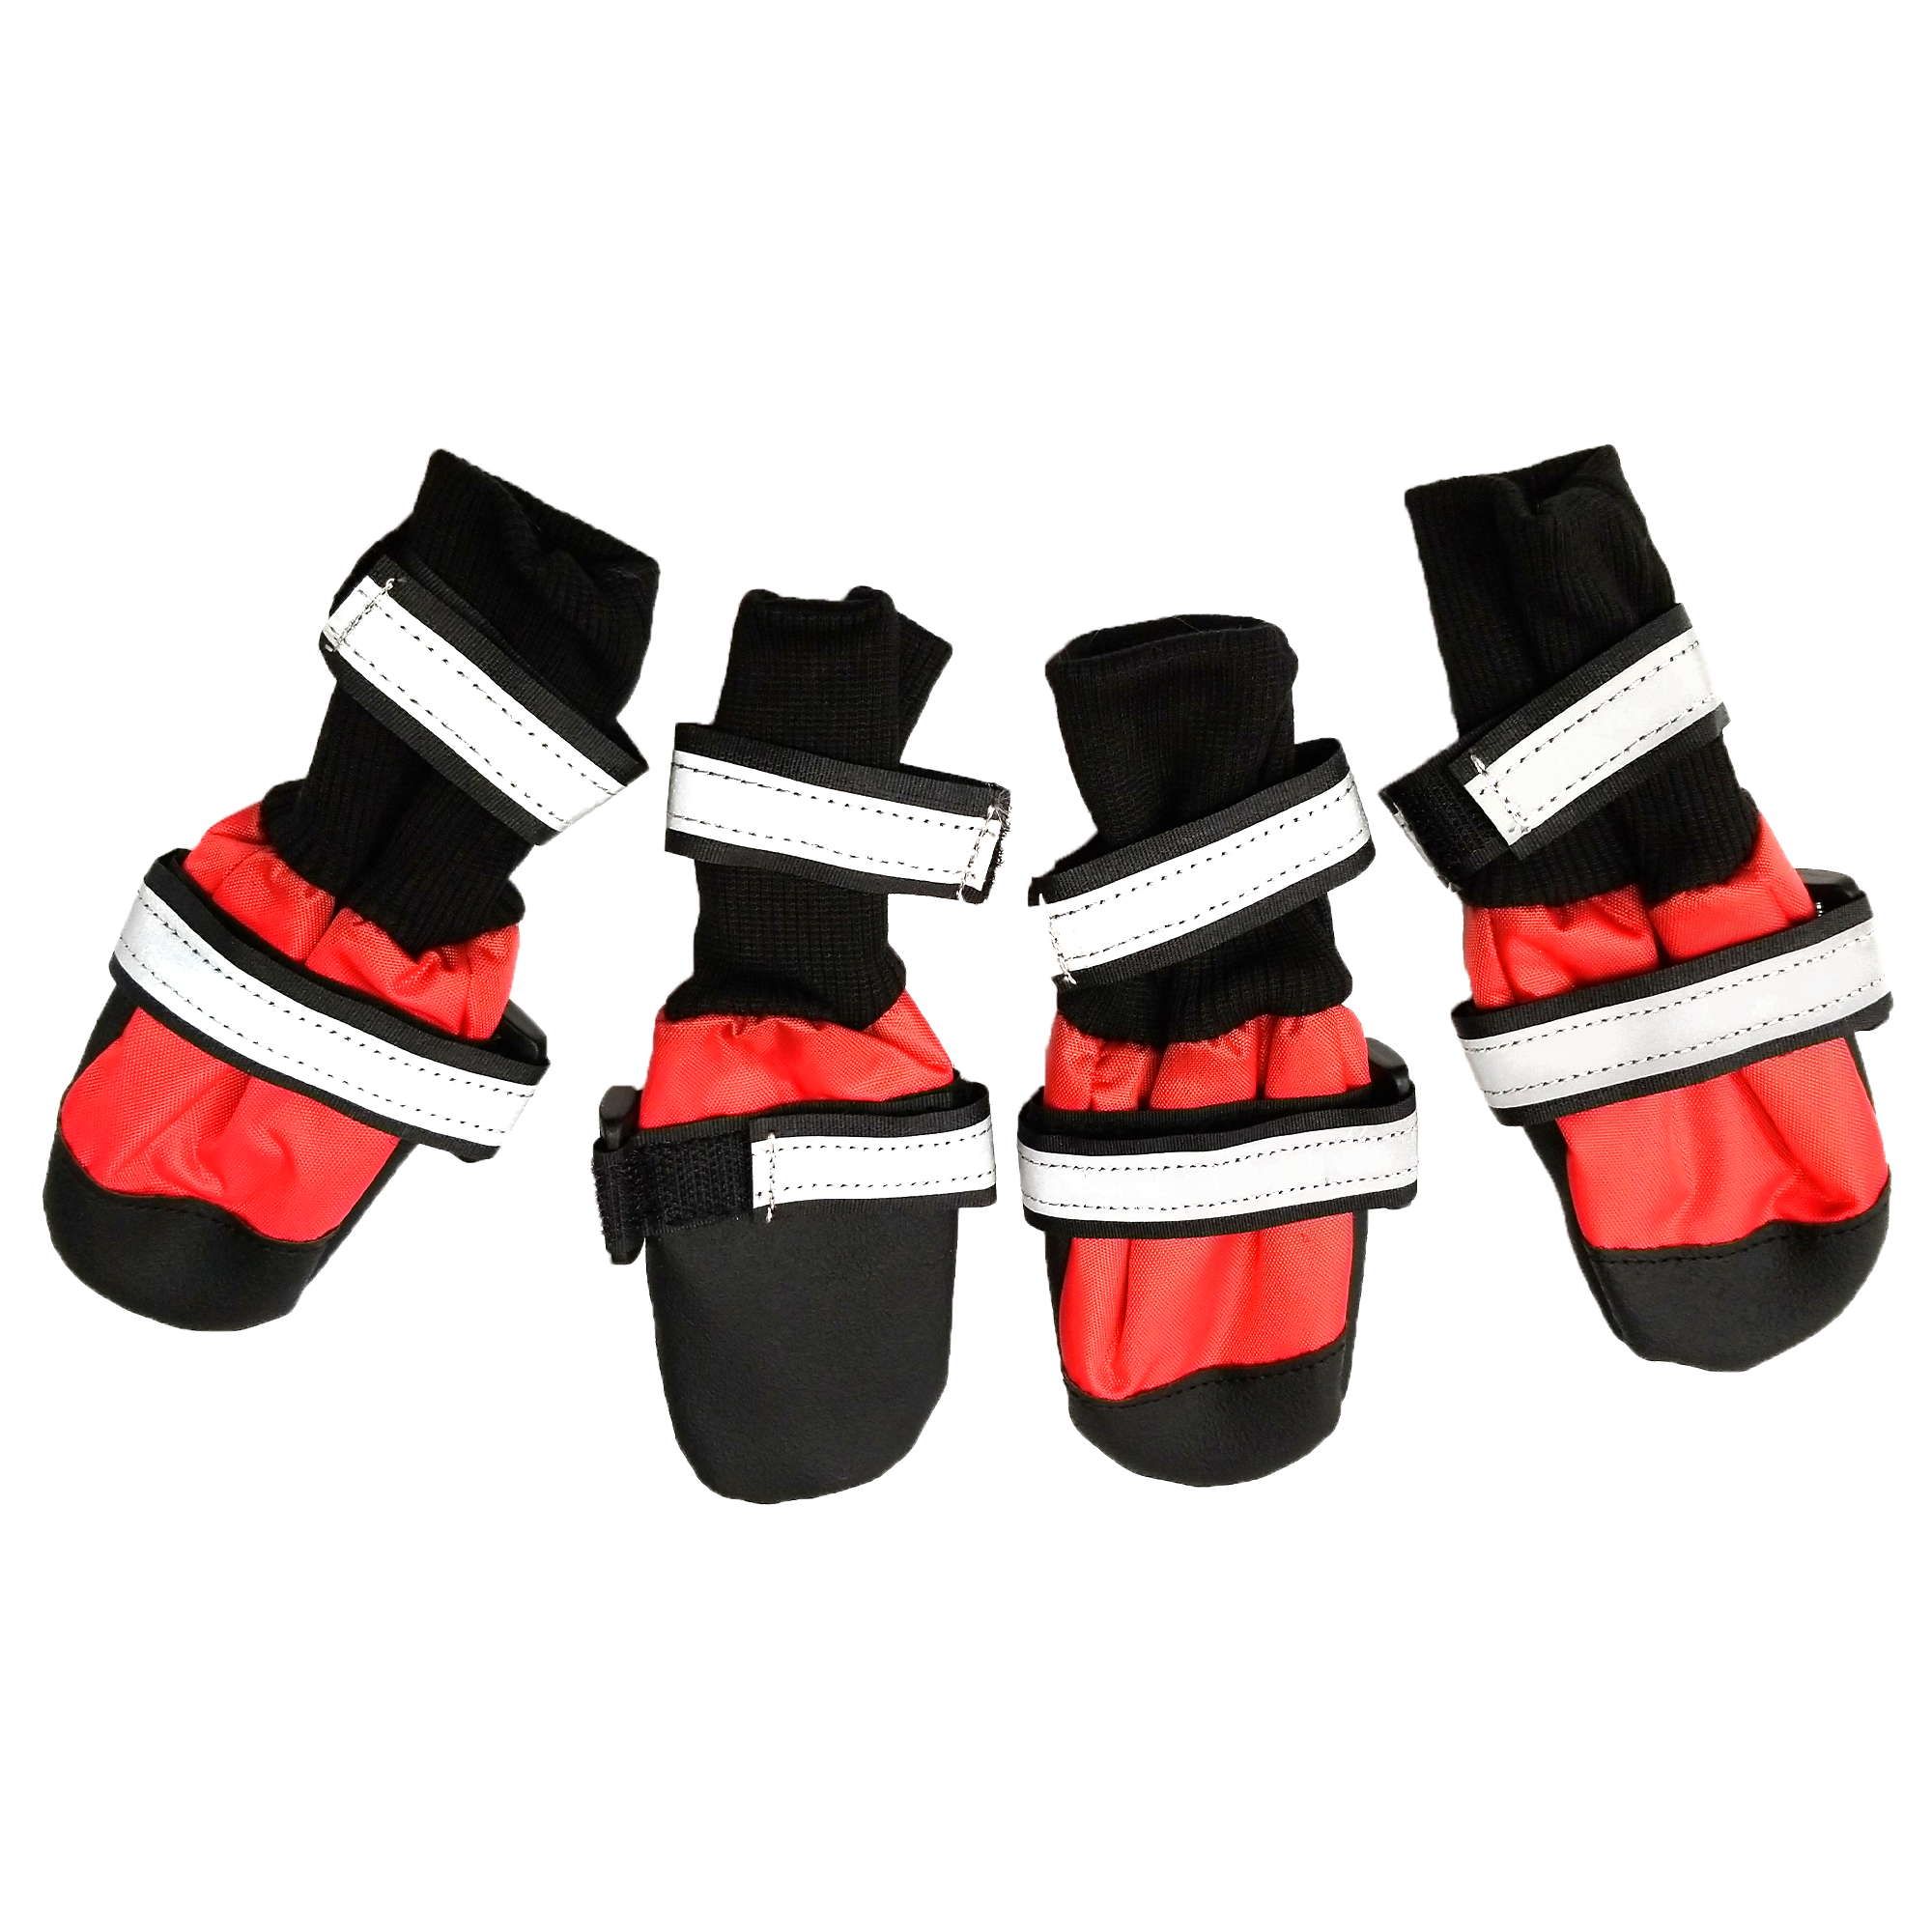 Lined Winter Dog Boots With Knitted Cuffs, Two Reflective Ties, Rubber Sole & Toe, Red/Black